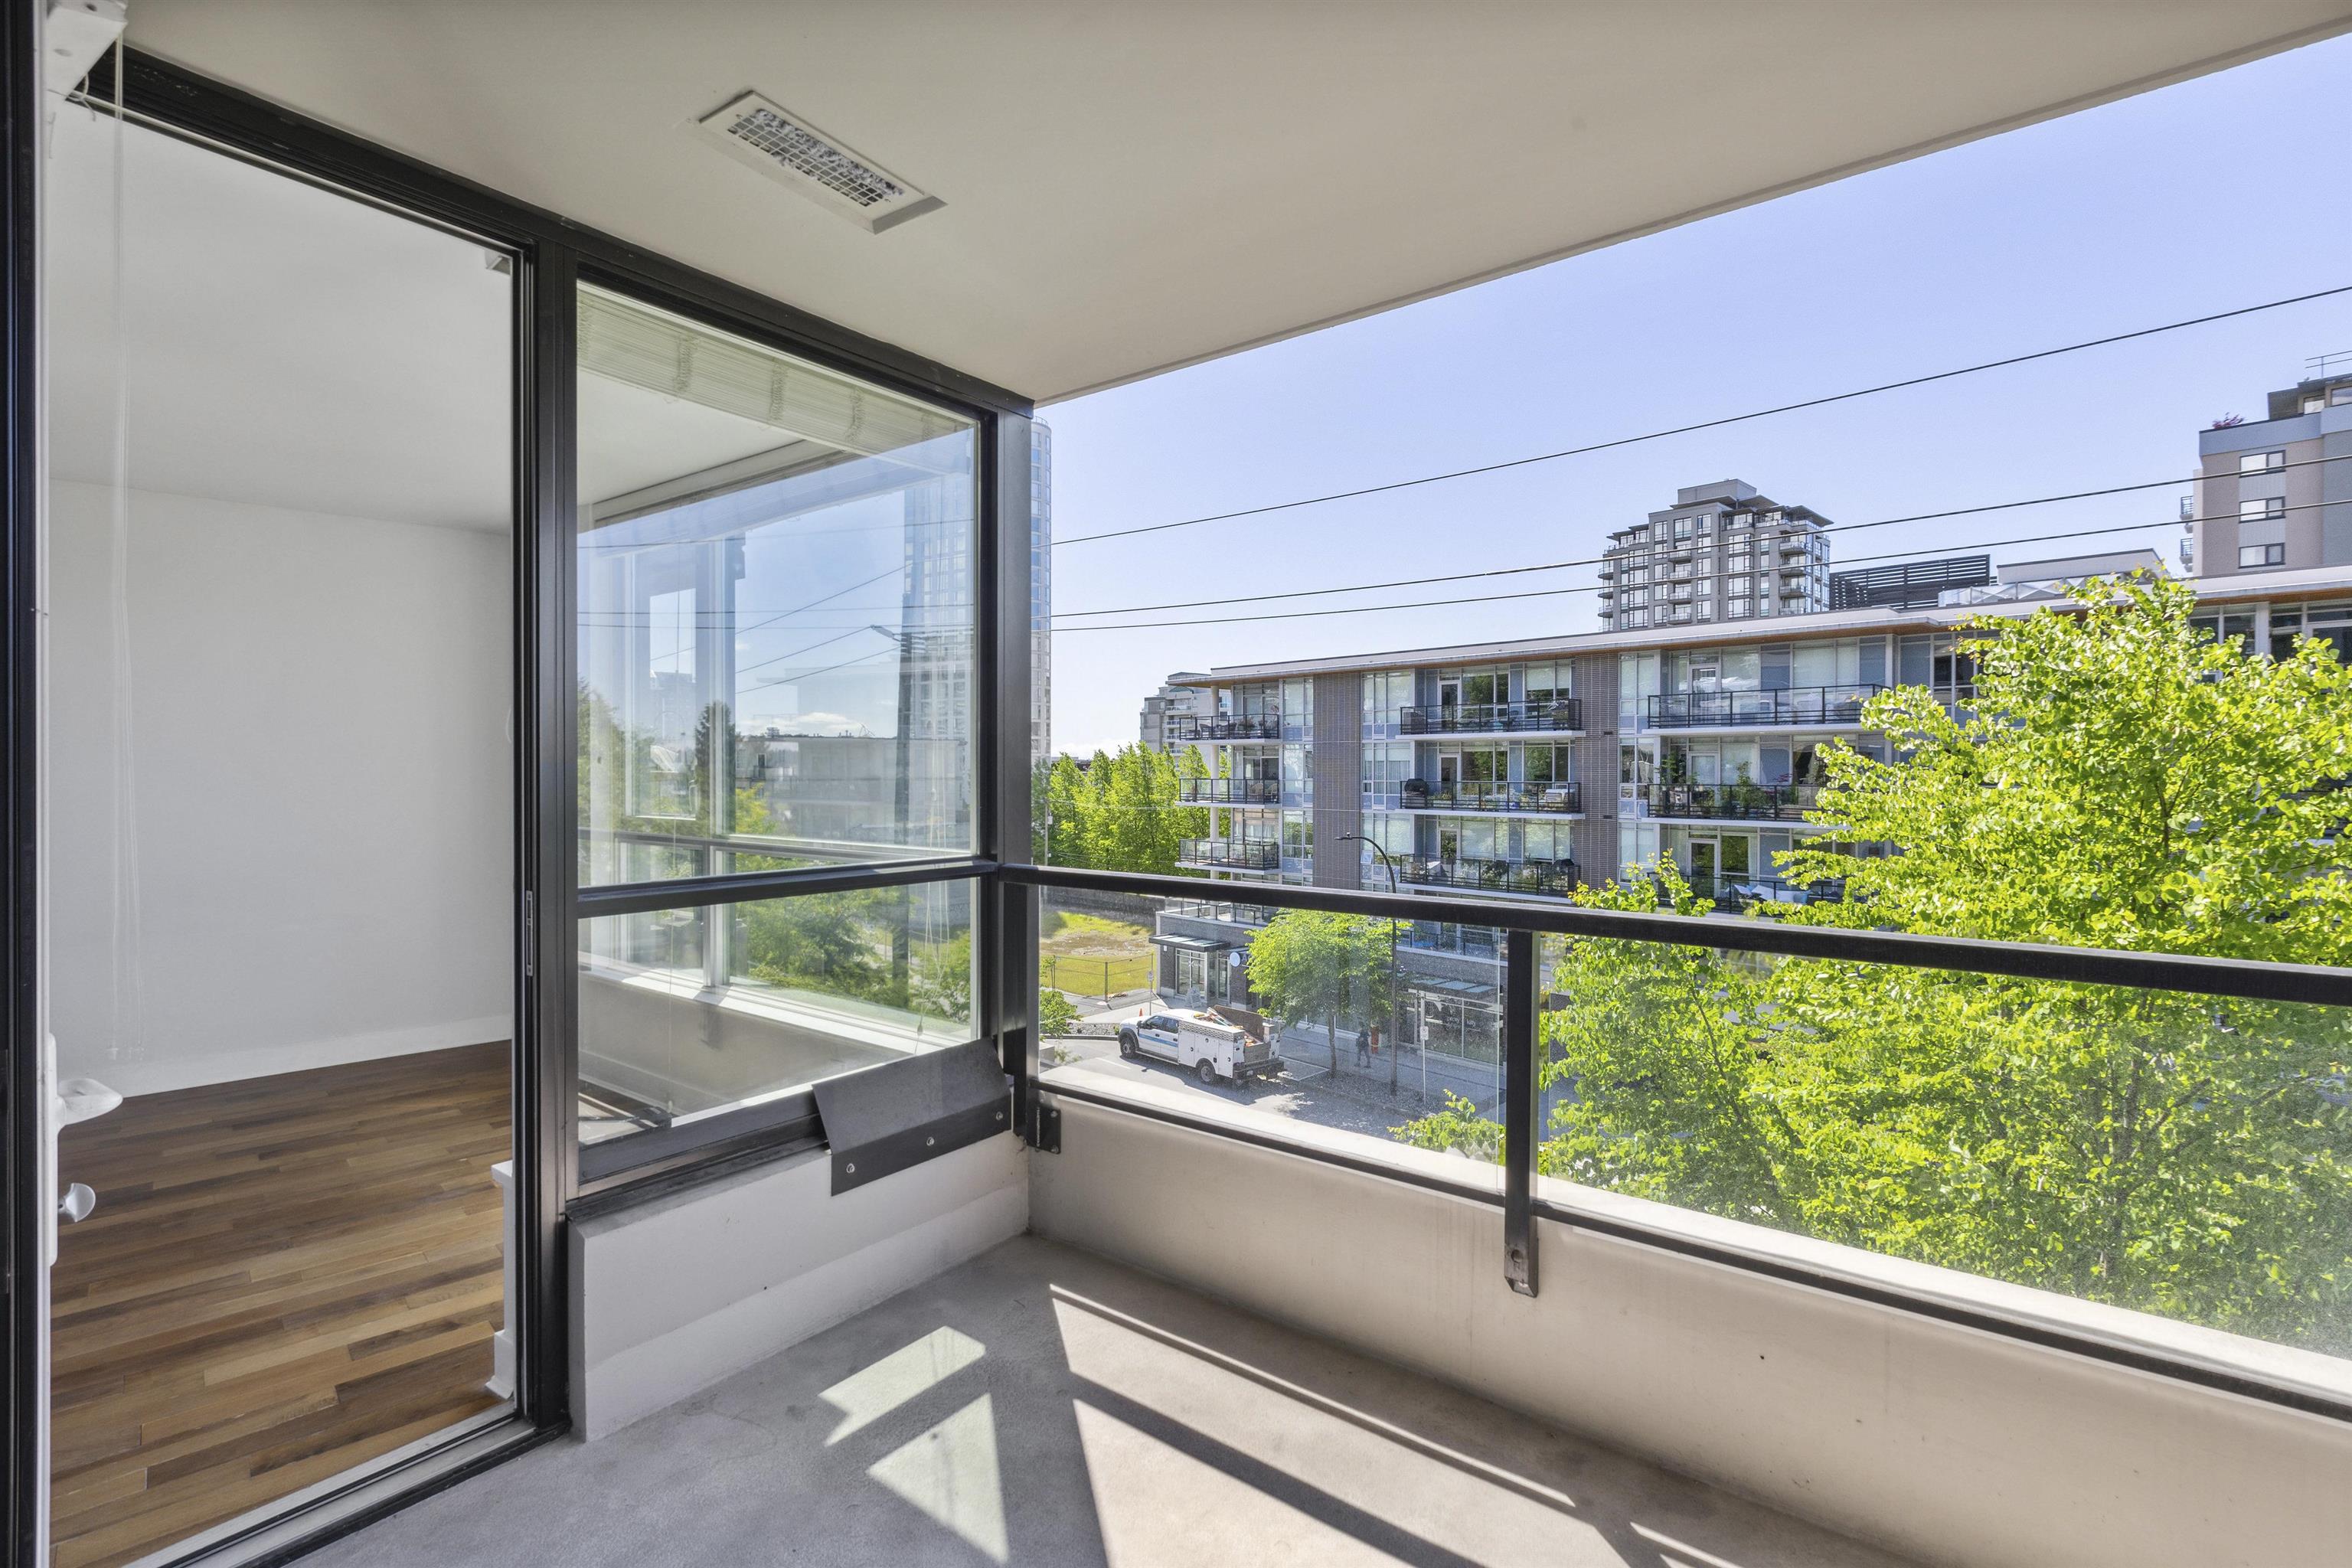 Listing image of 405 160 W 3RD STREET